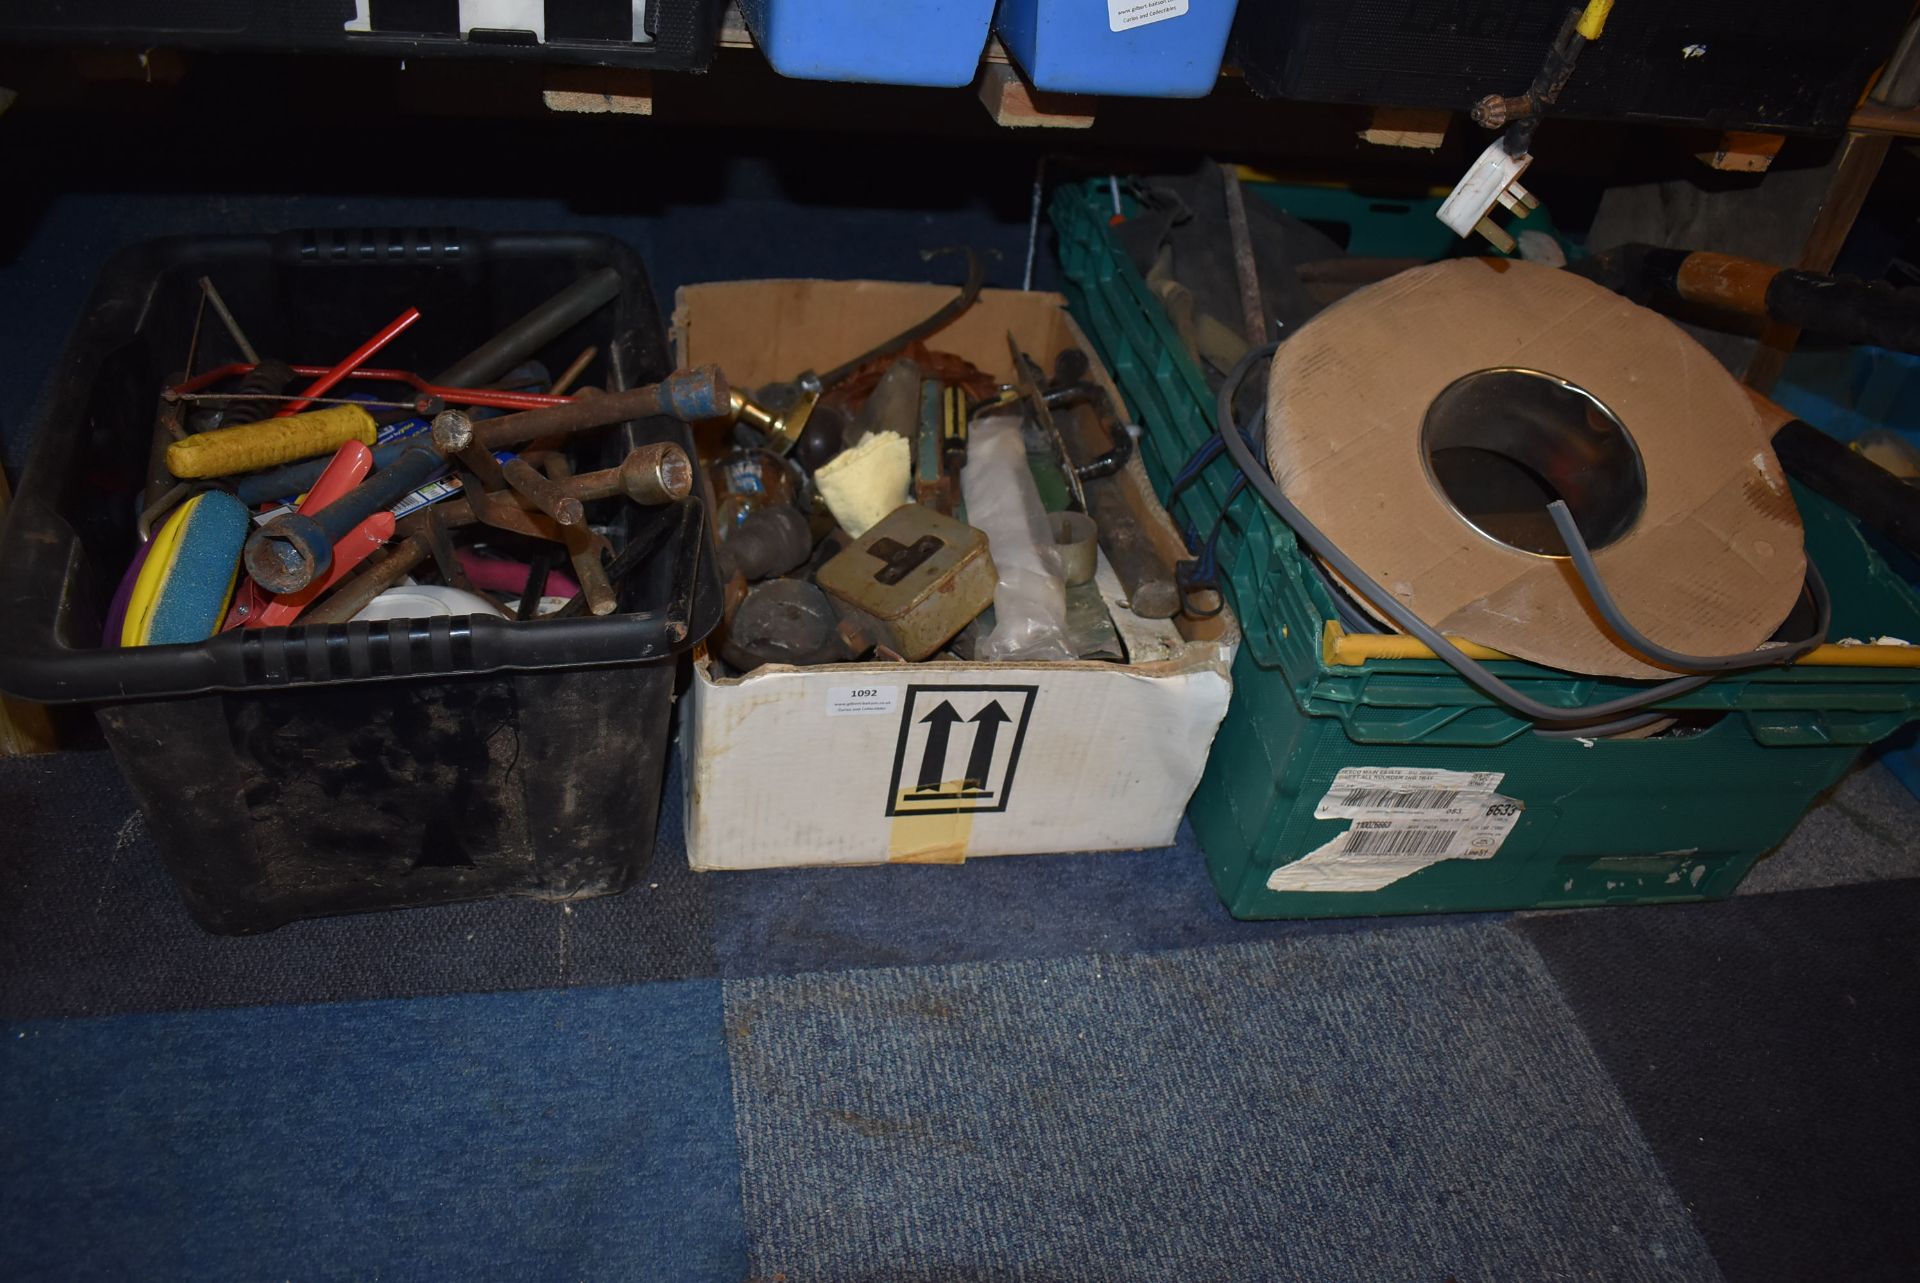 *Contents Under Shelves to Include Hand Tools, Sockets, Spool of Wire, etc.